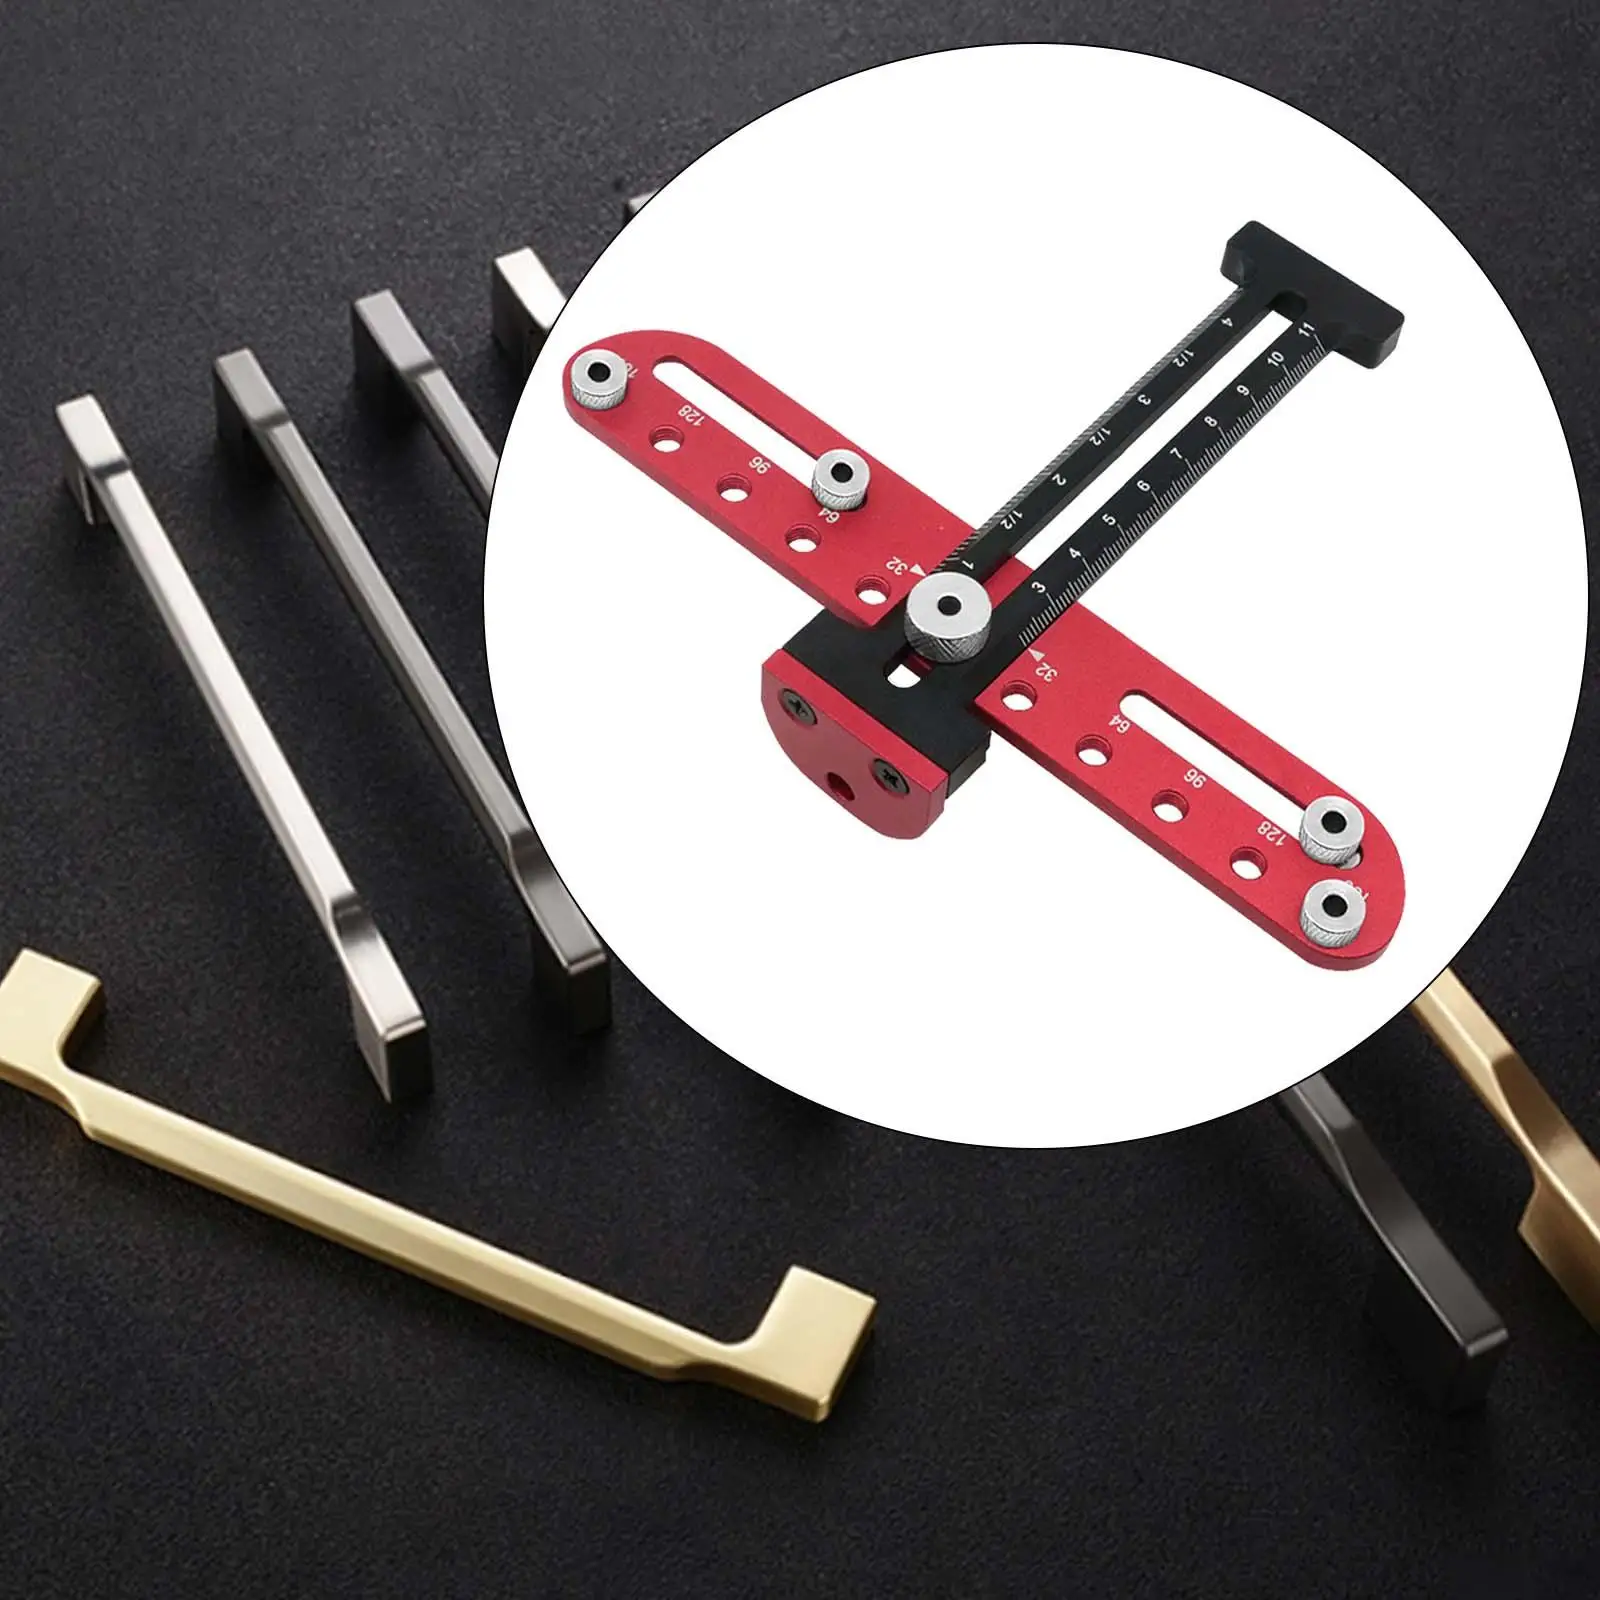 Hole punch Template Wardrobe Adjustable Drill Guide Ruler Measure Tool Drill Hole Punch Jig